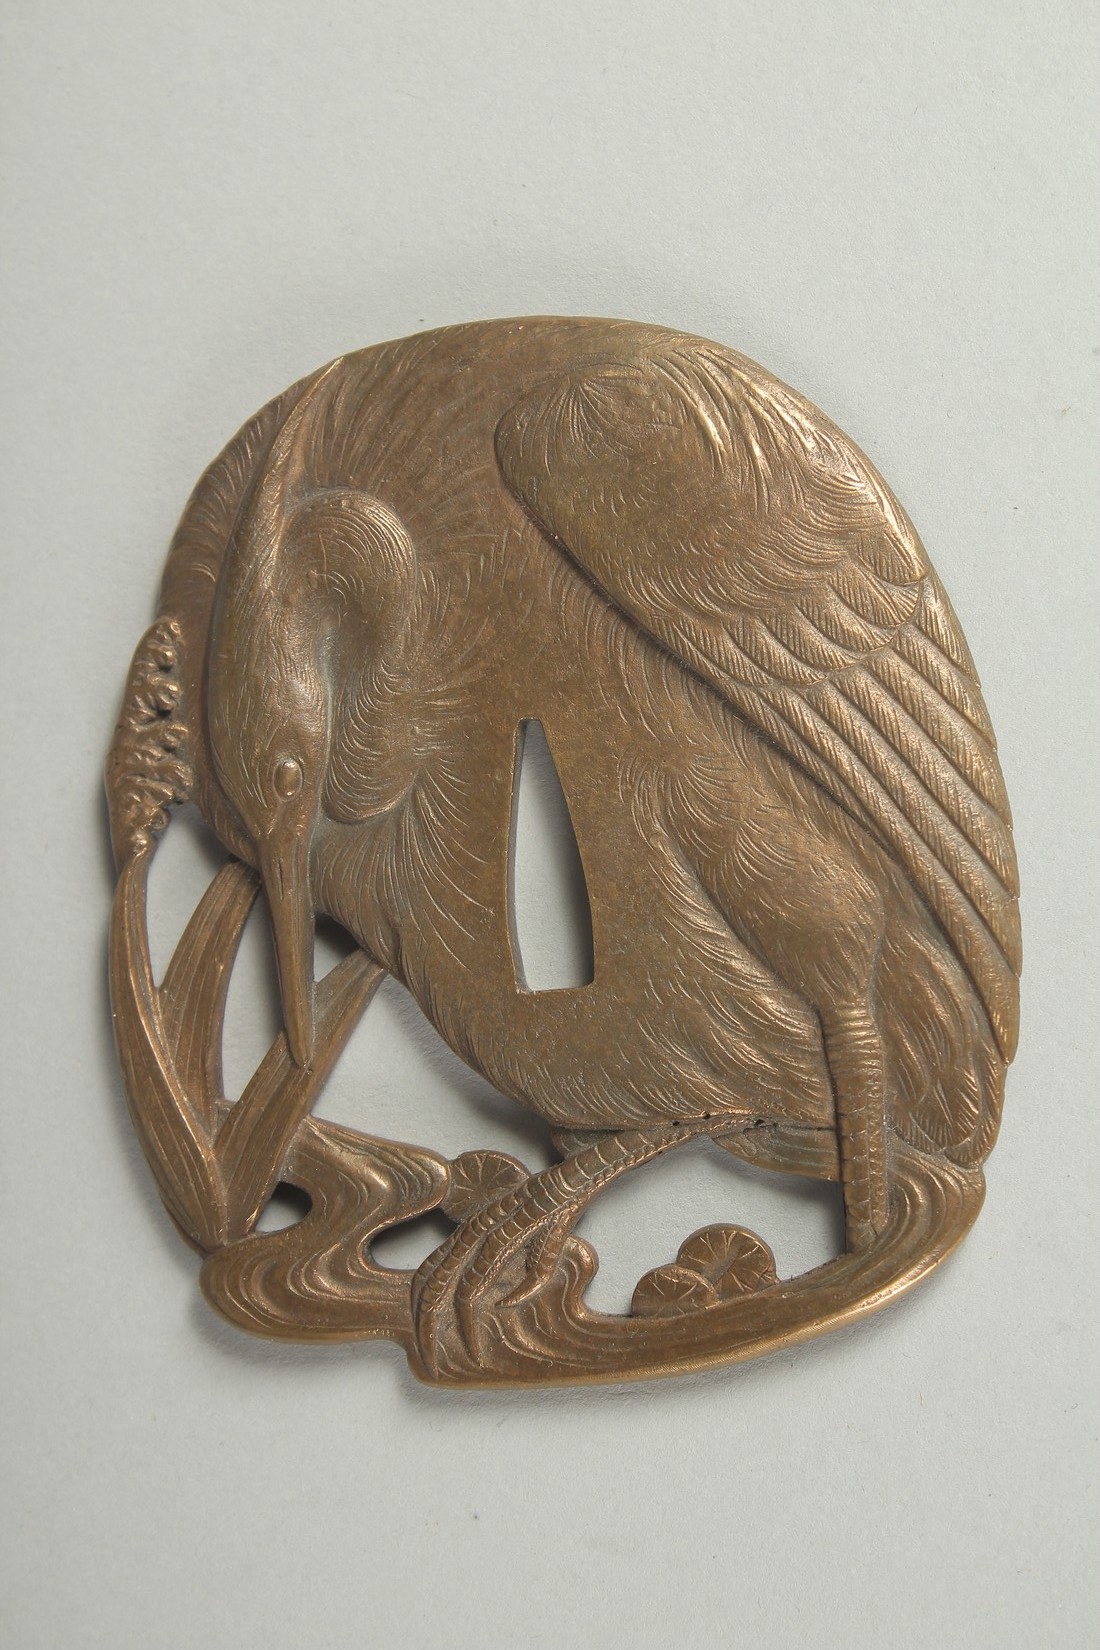 A JAPANESE ENGRAVED BRASS OPENWORKED TSUBA, designed with an egret, 9.5cm x 8cm.